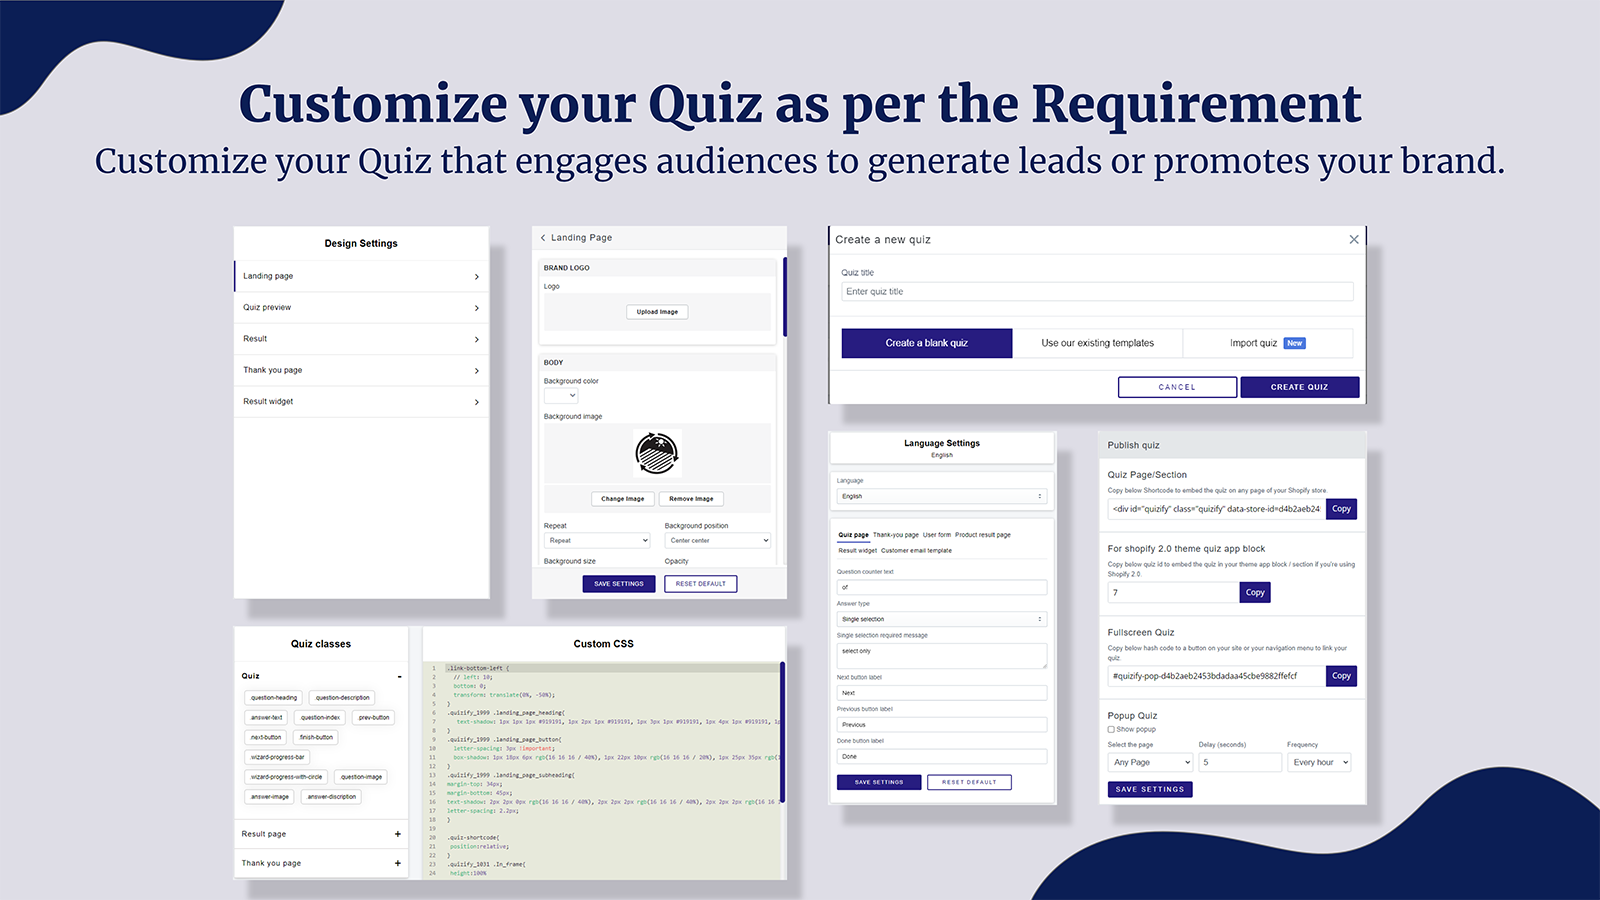 Customize your Quiz that engages audiences to generate leads